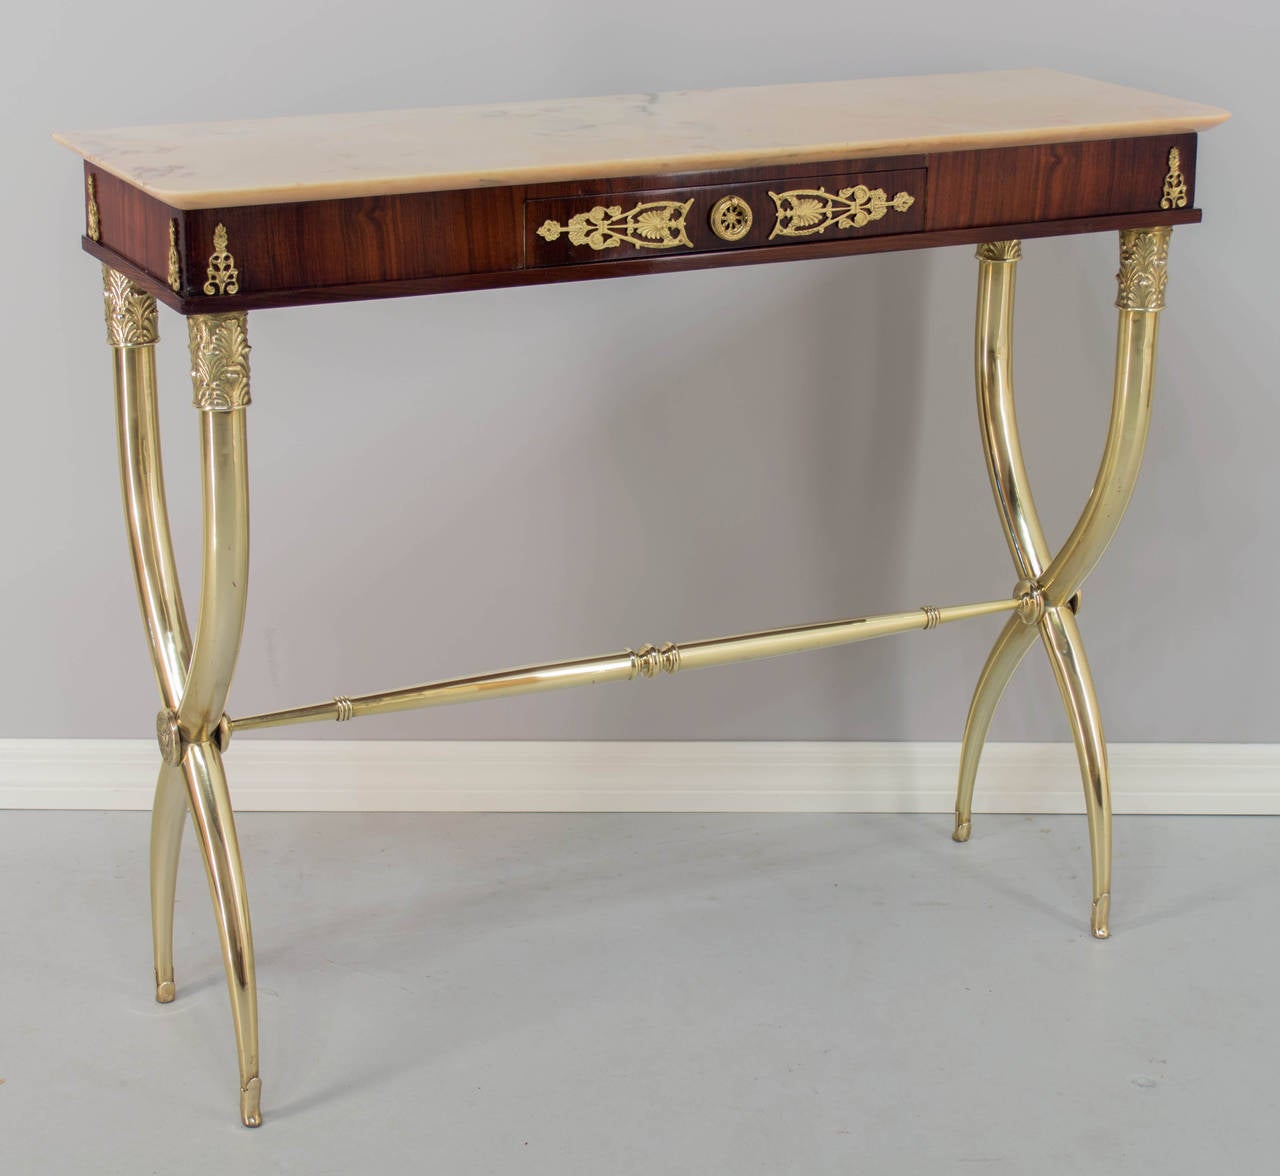 Italian console table with polished brass base and onyx top. Mahogany veneer with dovetailed drawer and decorative brass hardware. Slim profile with nice proportions and of very fine quality. All original. As always, more photos available upon